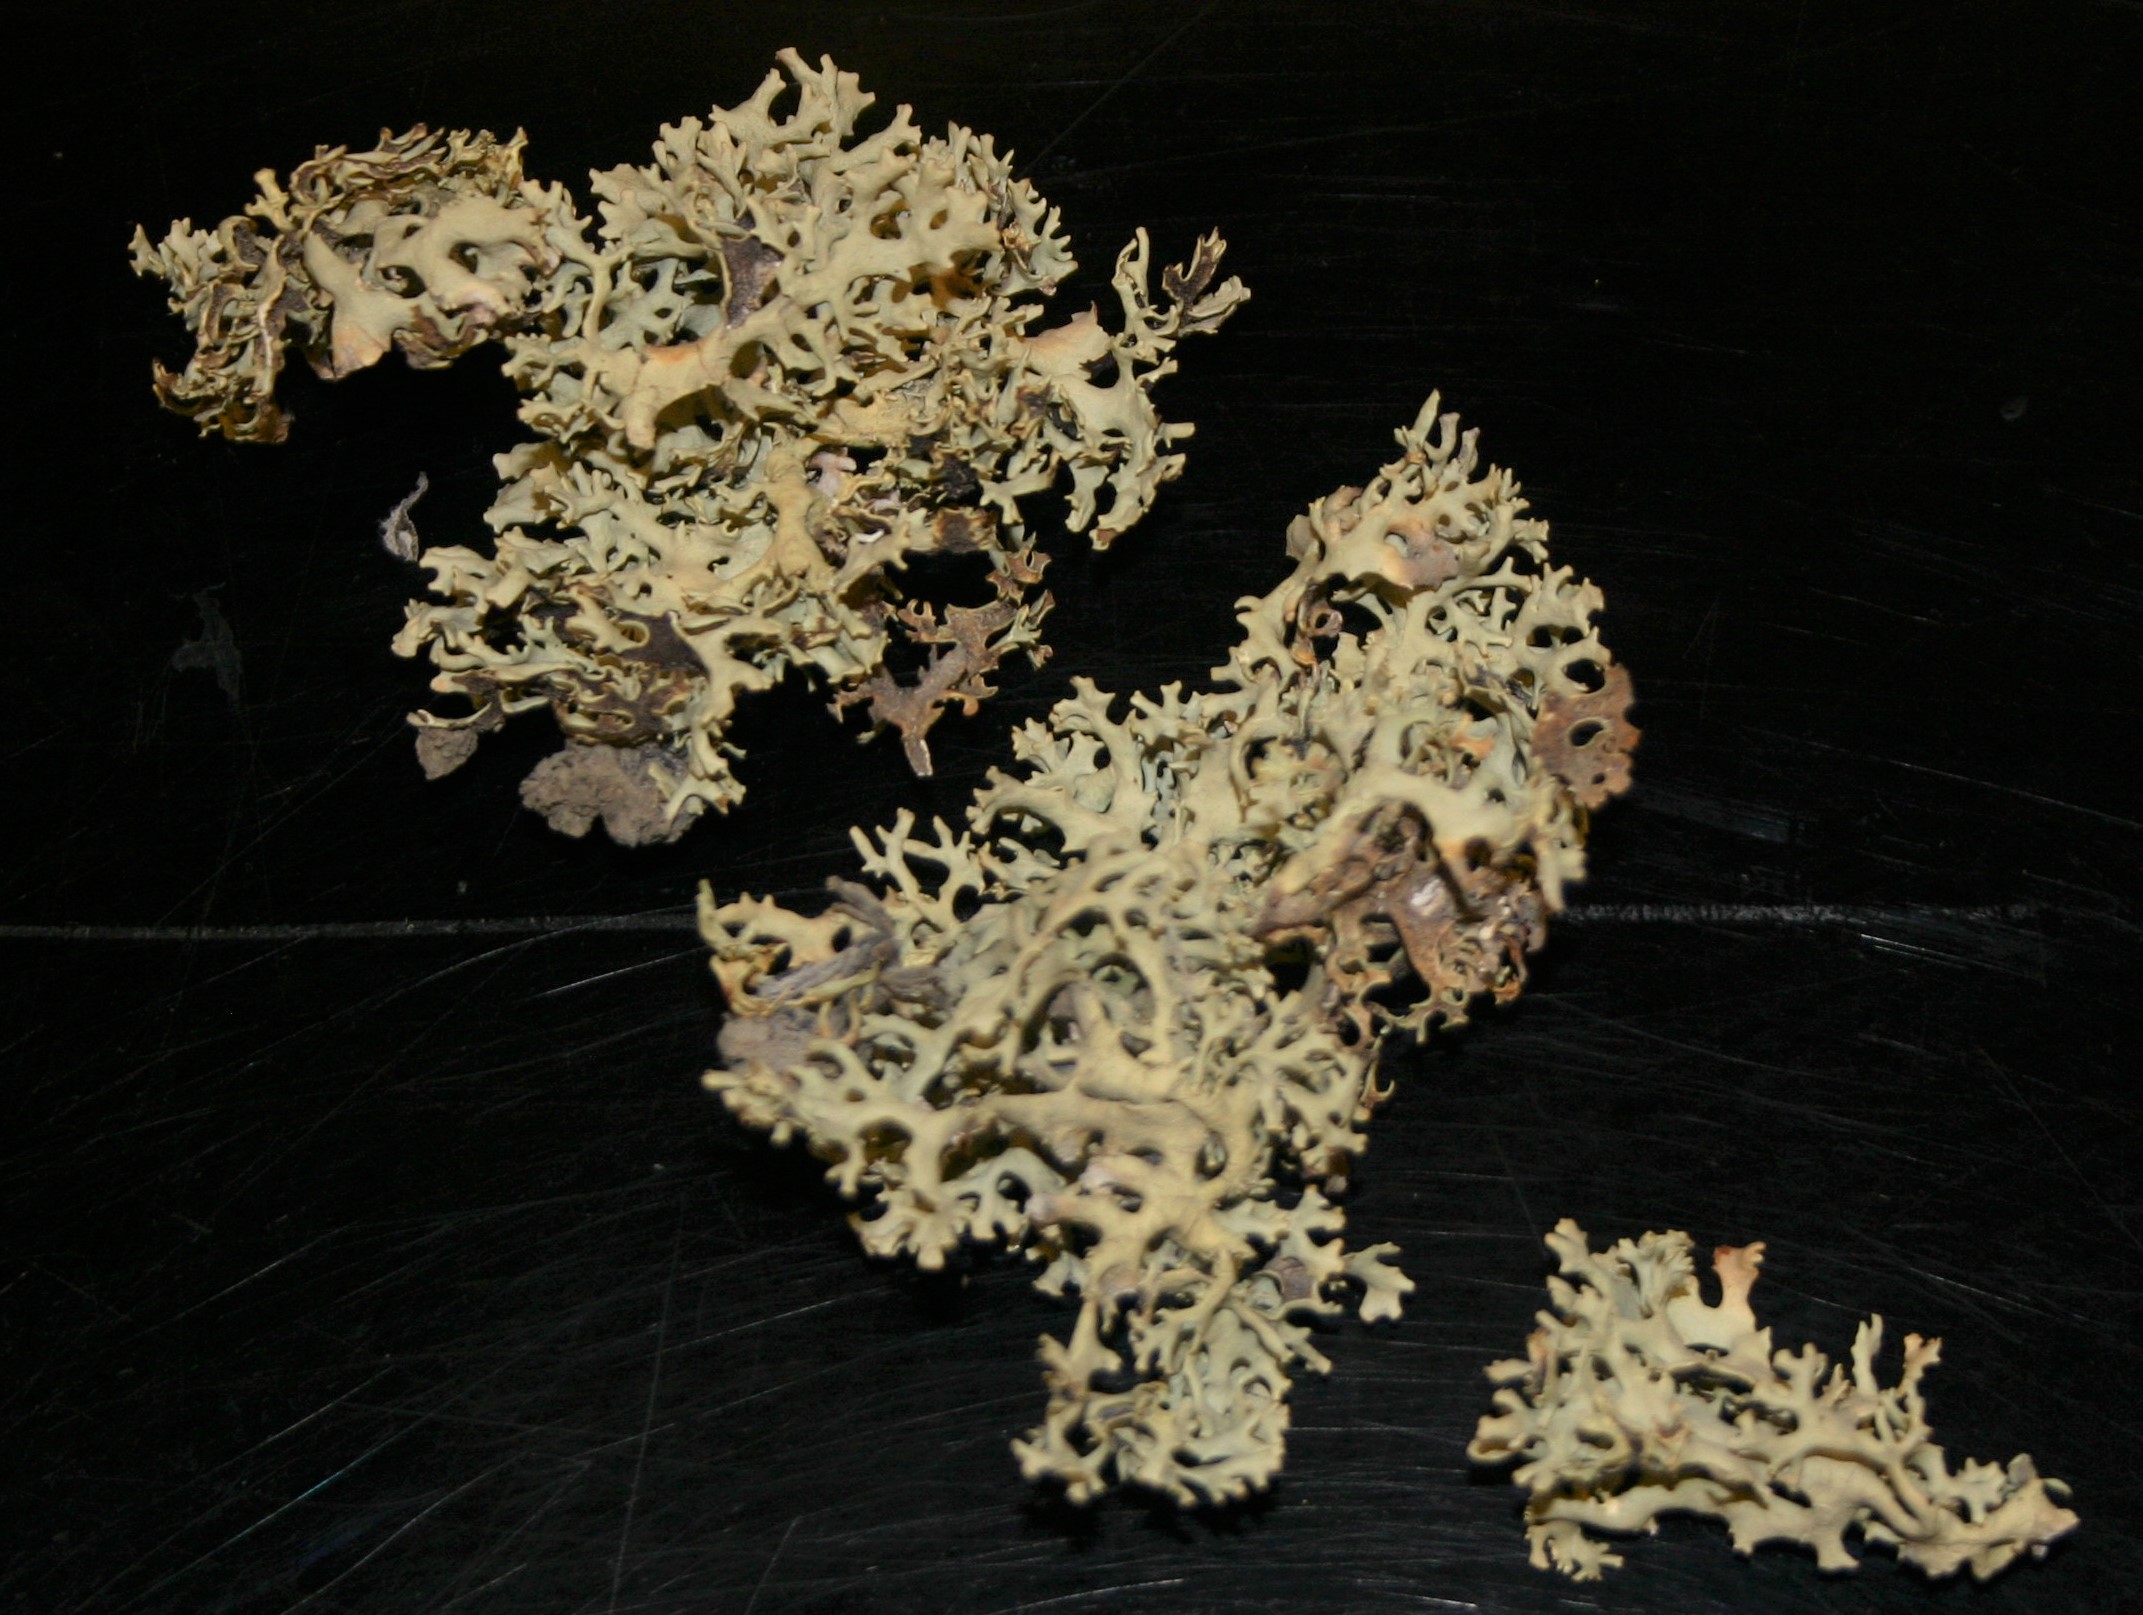 Three clumps of white0green coral-like lichen specimens on a black surface.